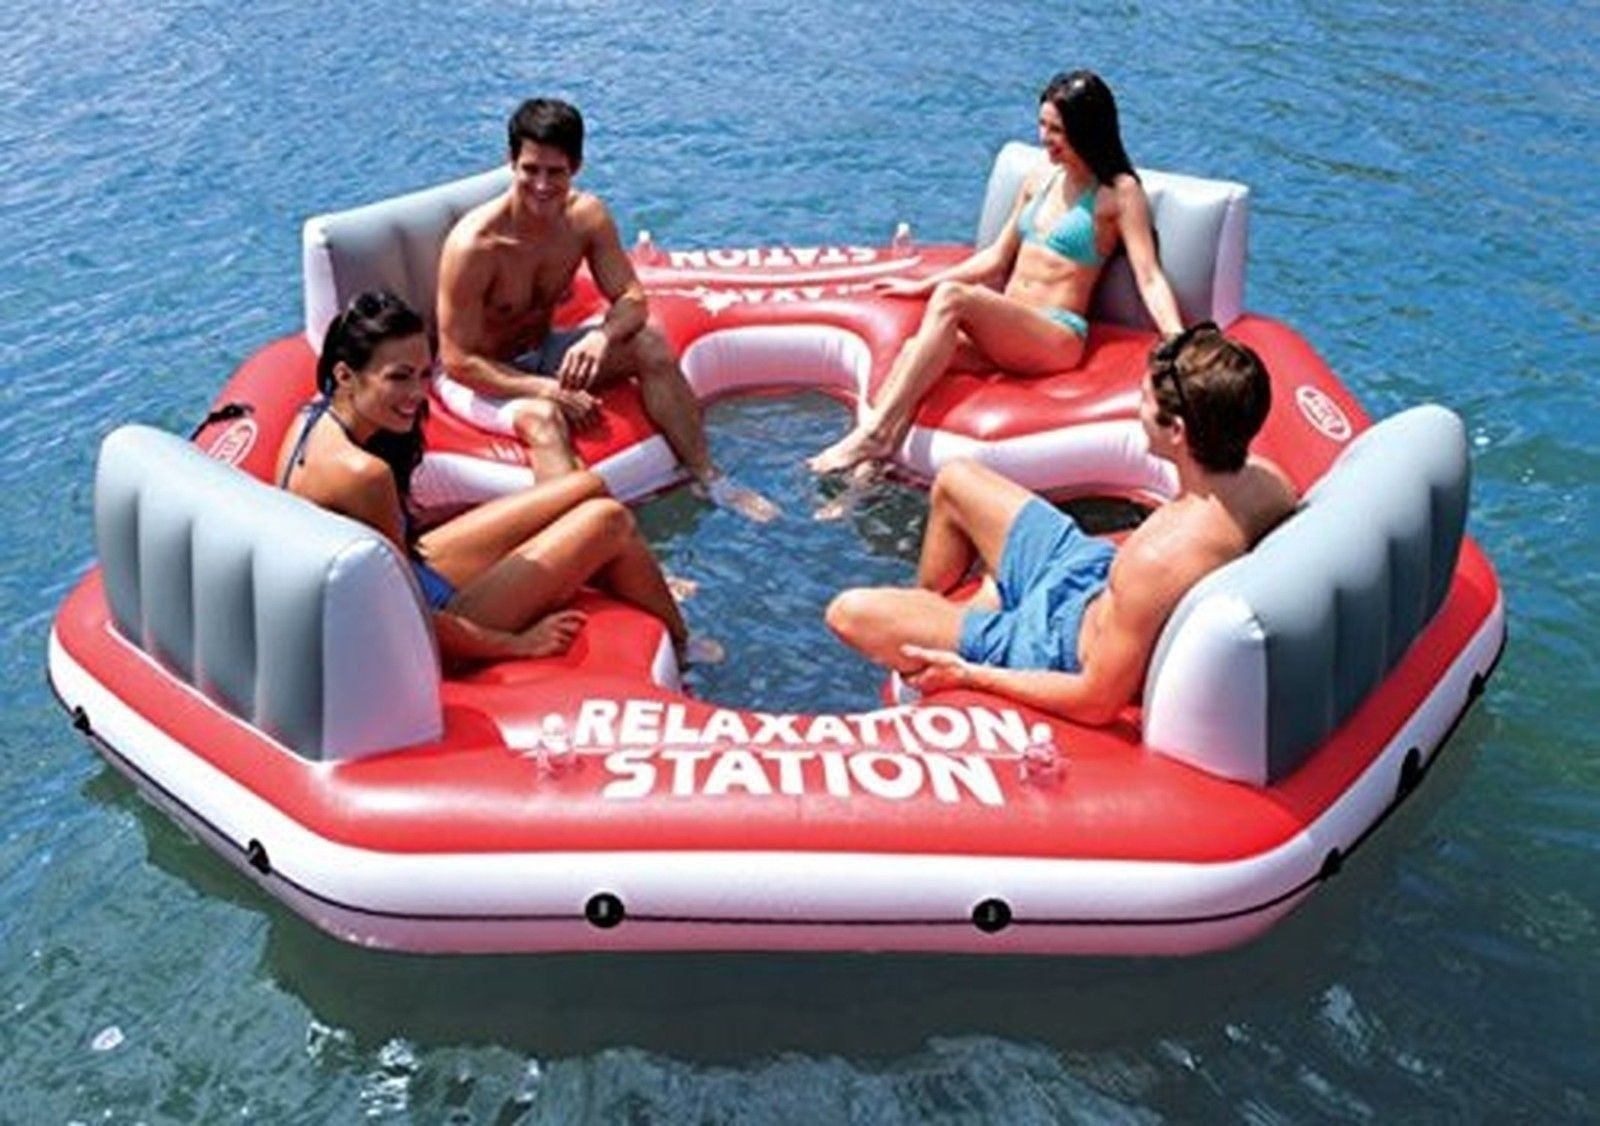 INTEX Pacific Paradise Relaxation Station Water Lounge 4-Person River Tube Raft